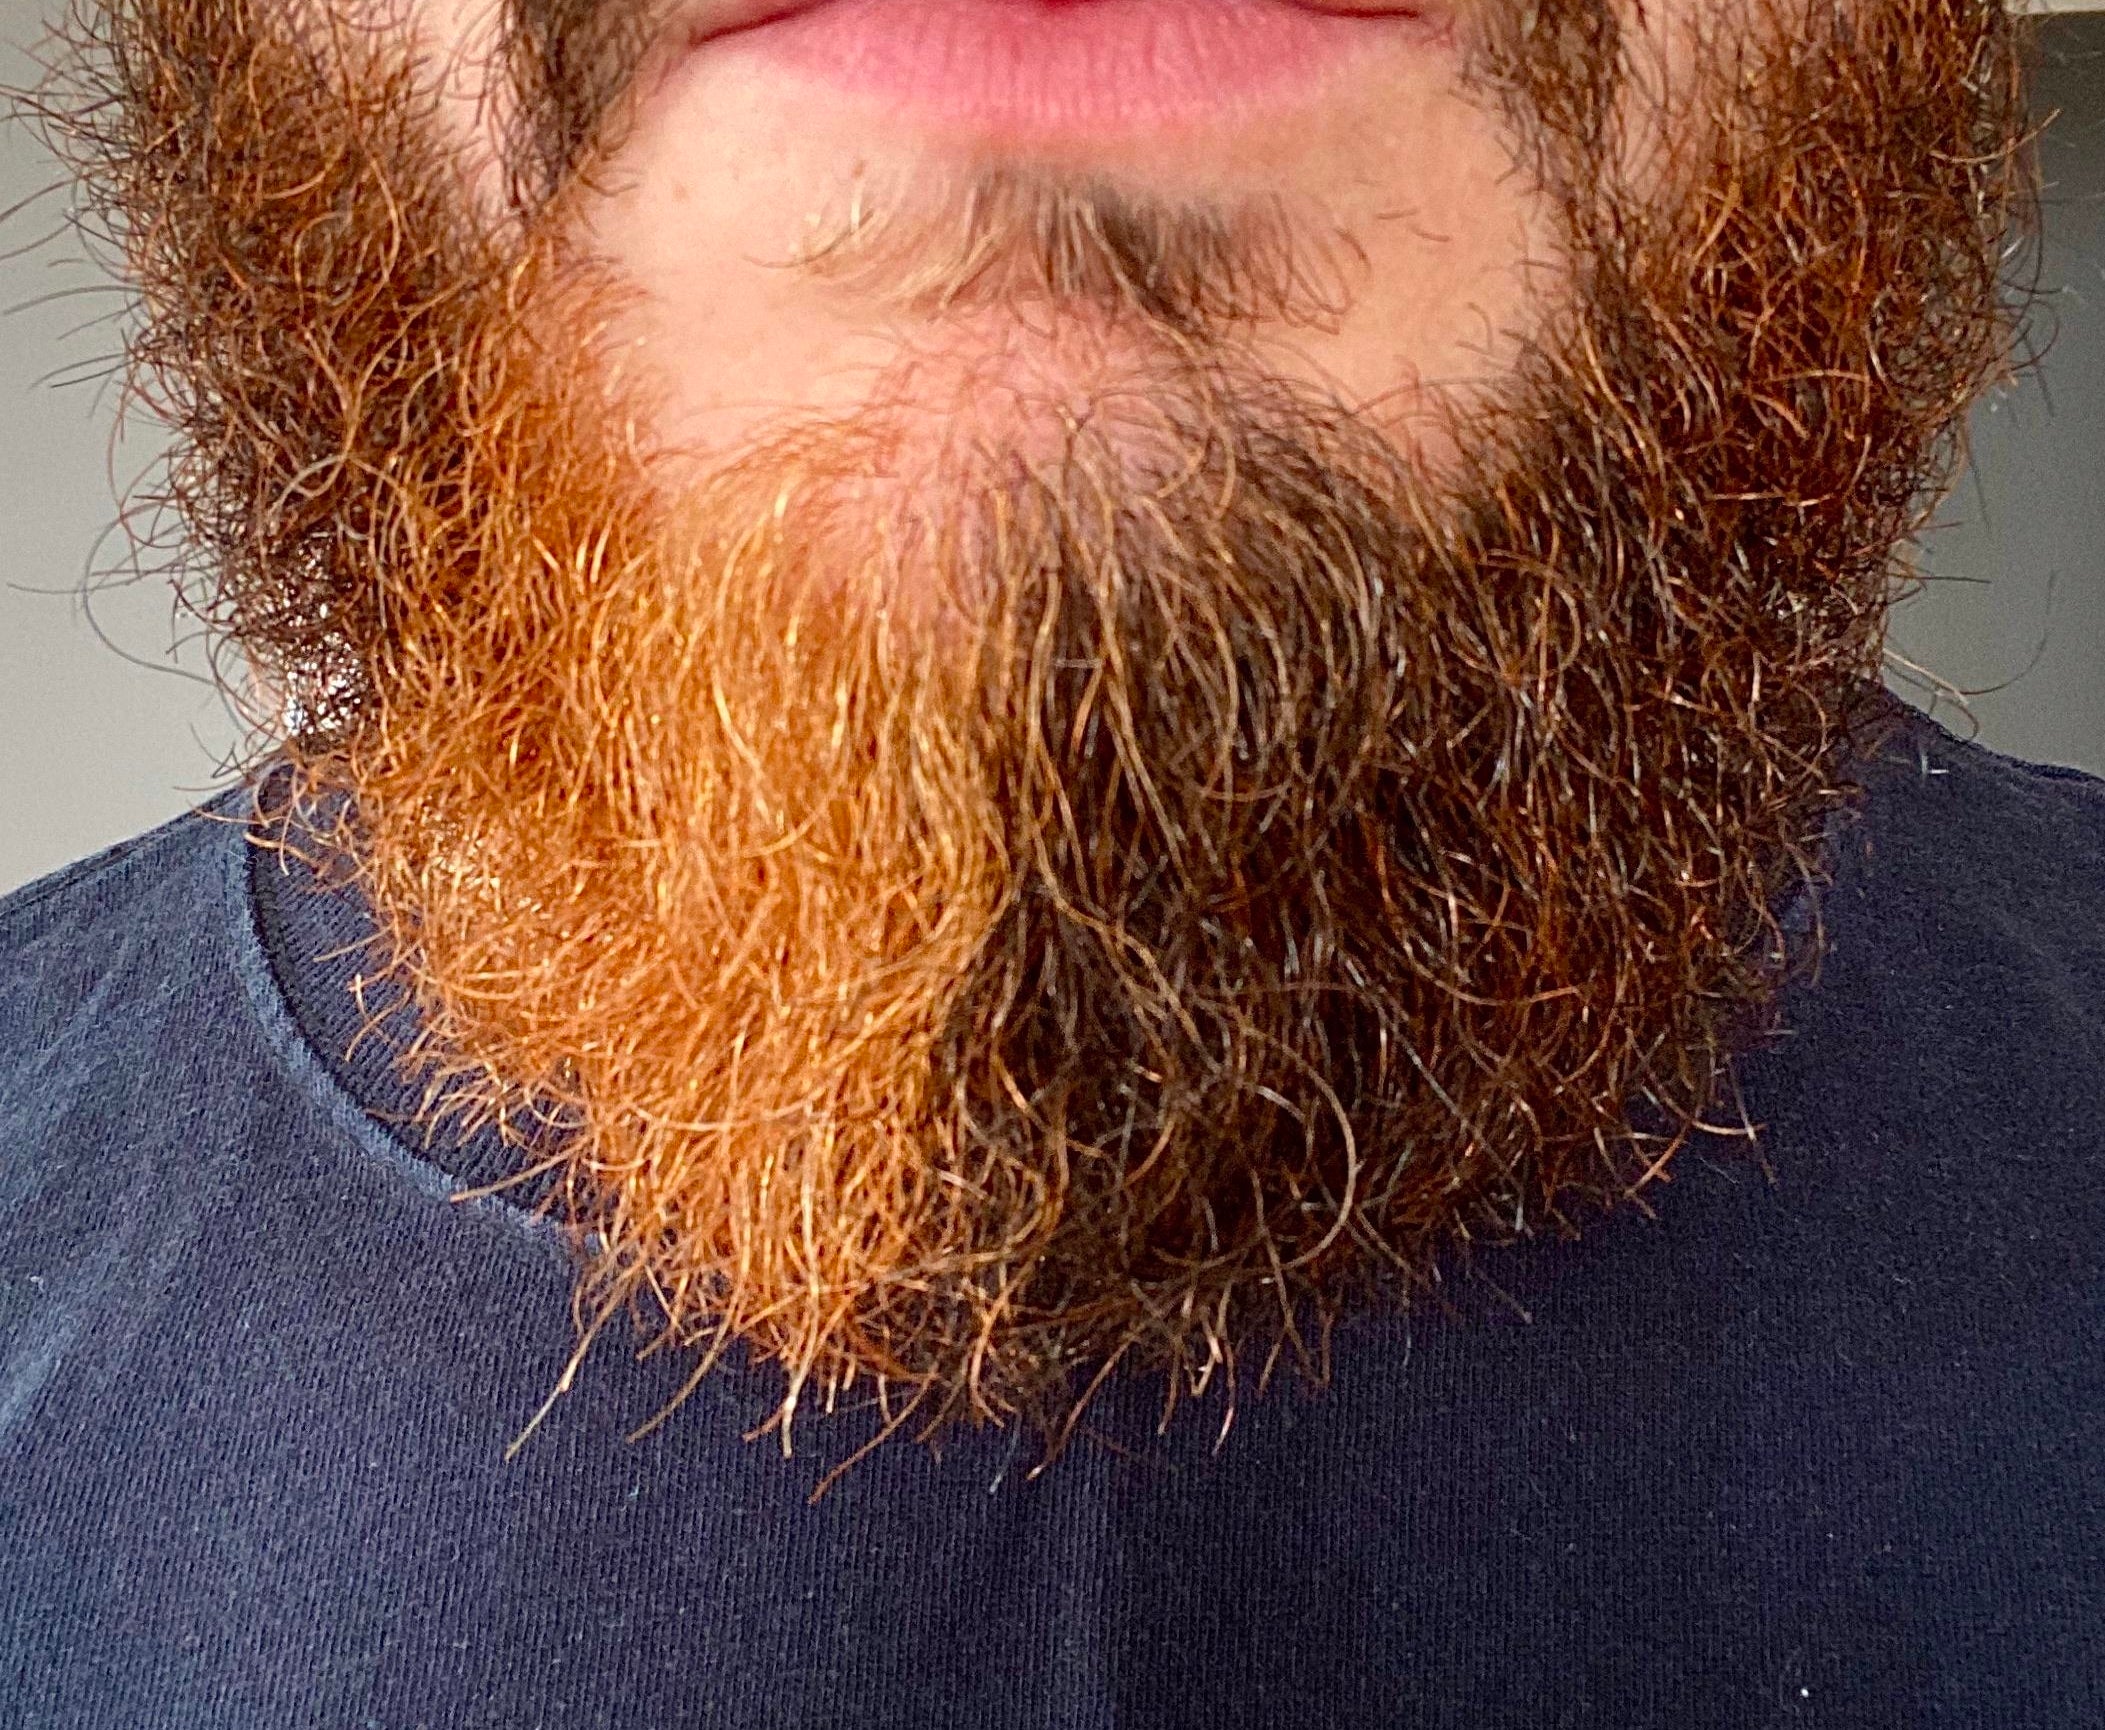 Different-colored beard